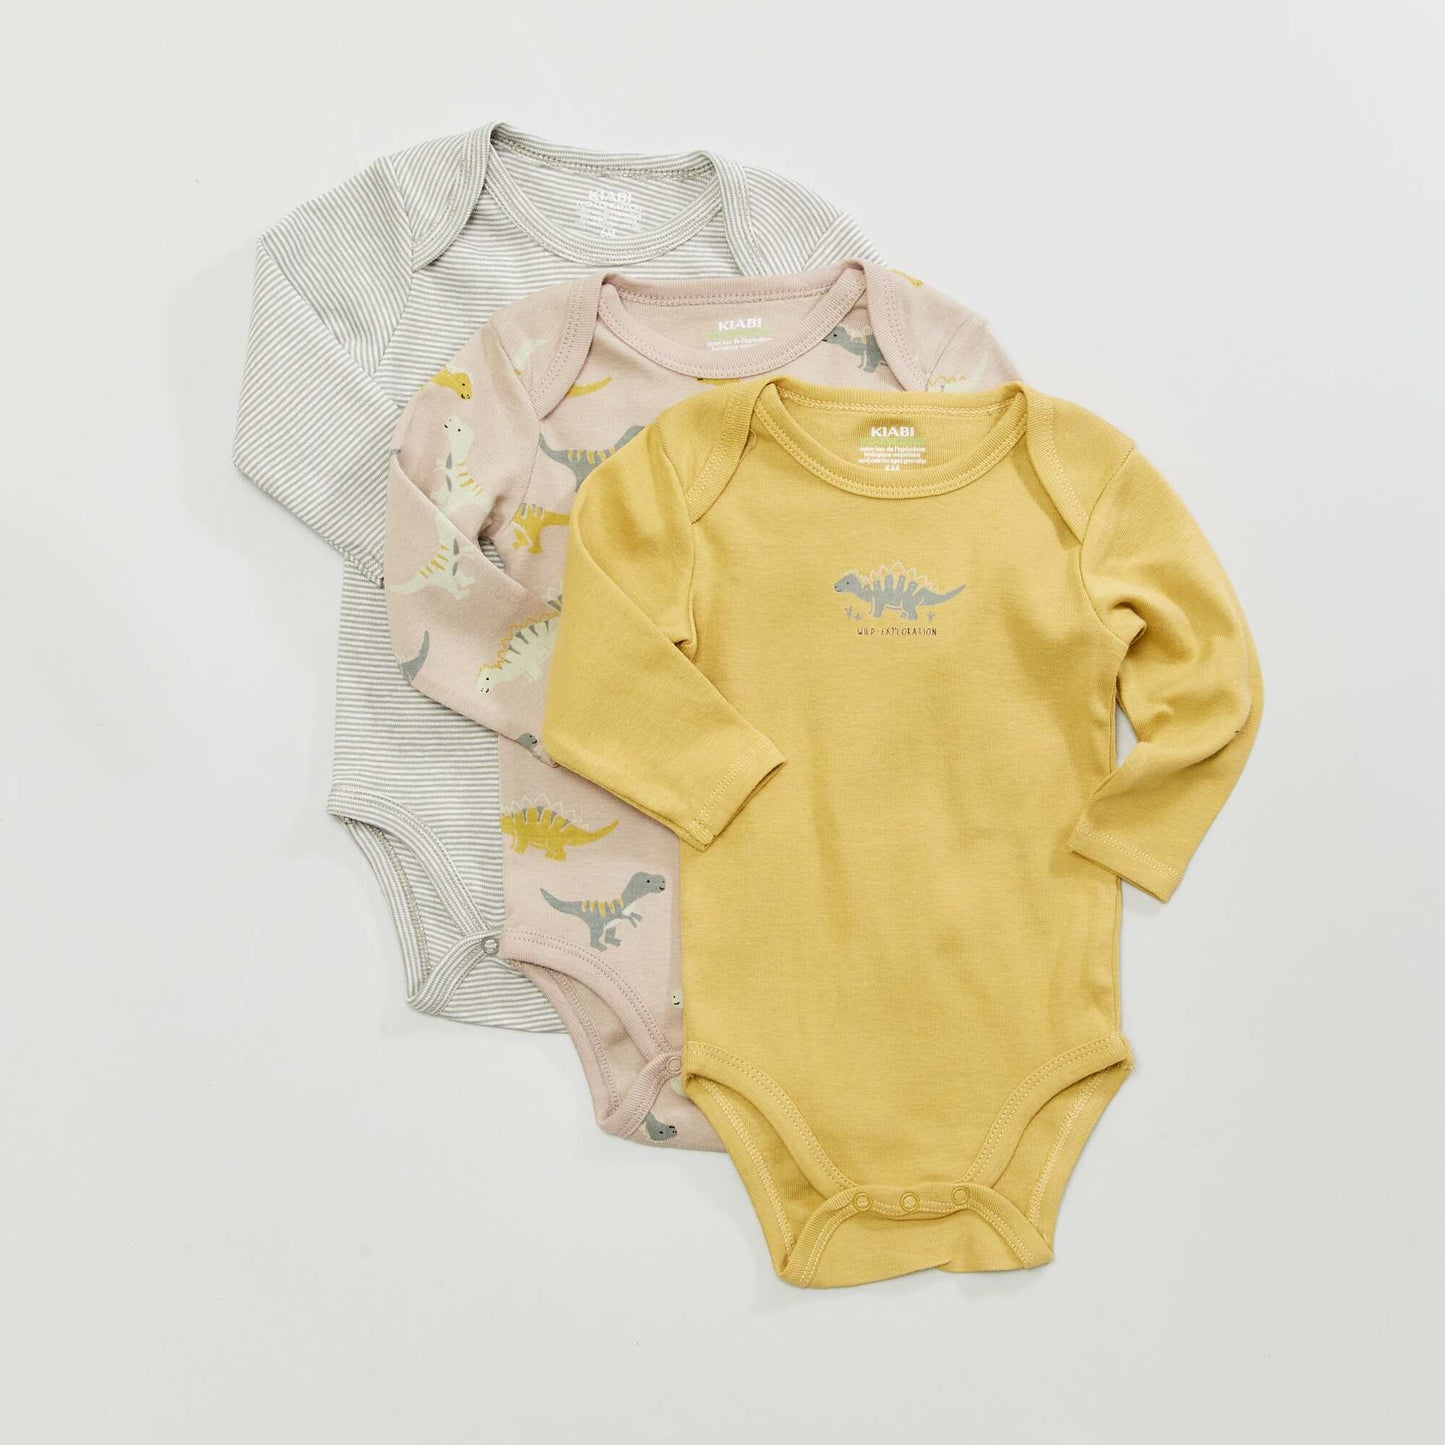 Pack of 3 long-sleeved bodies YELLOW